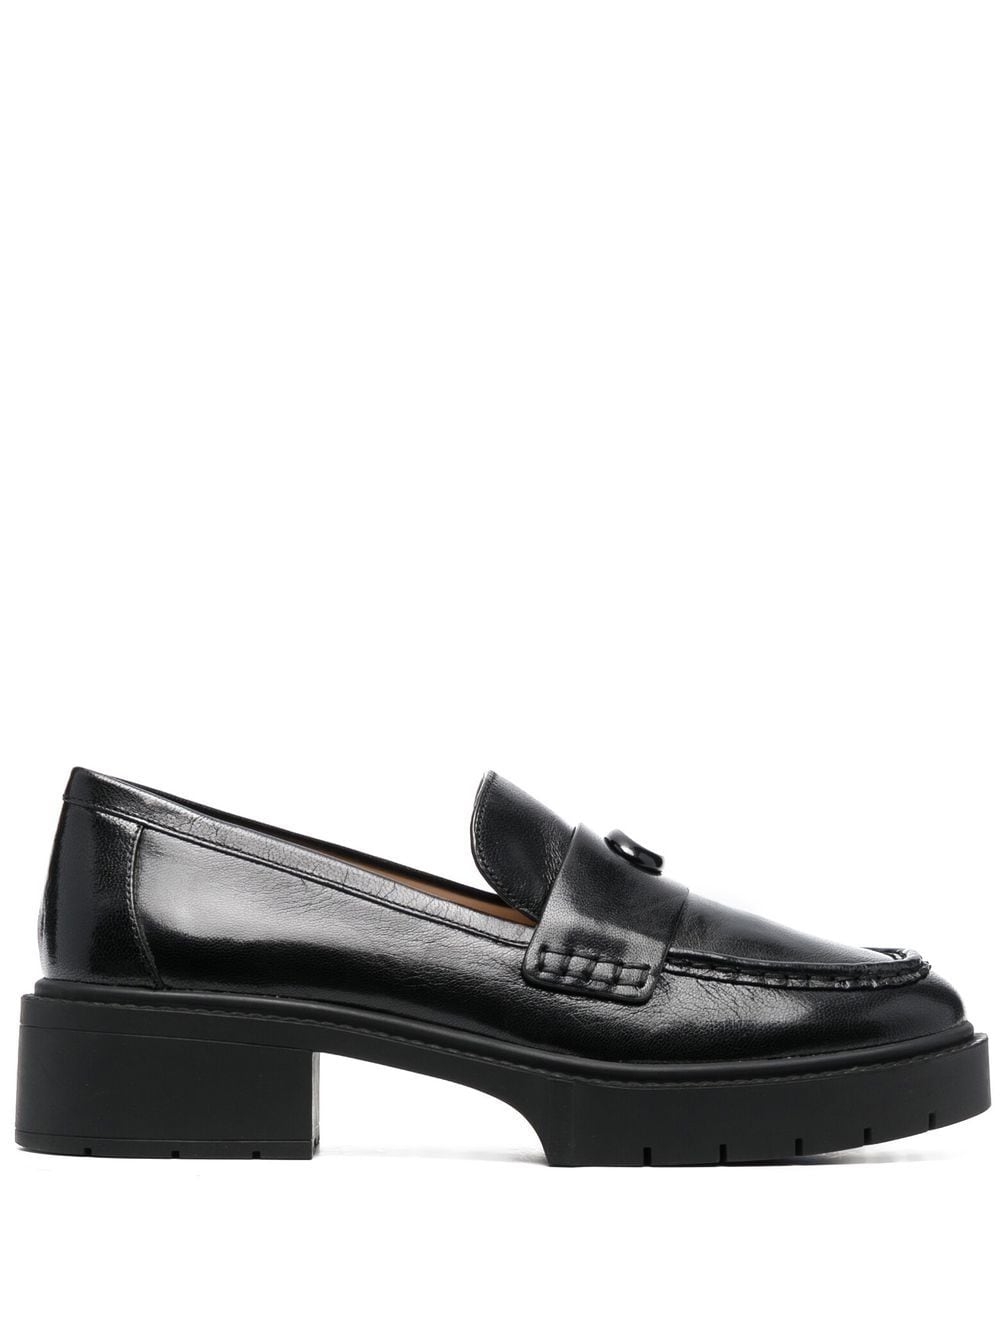 Coach Leah chunky sole leather loafers - Black von Coach